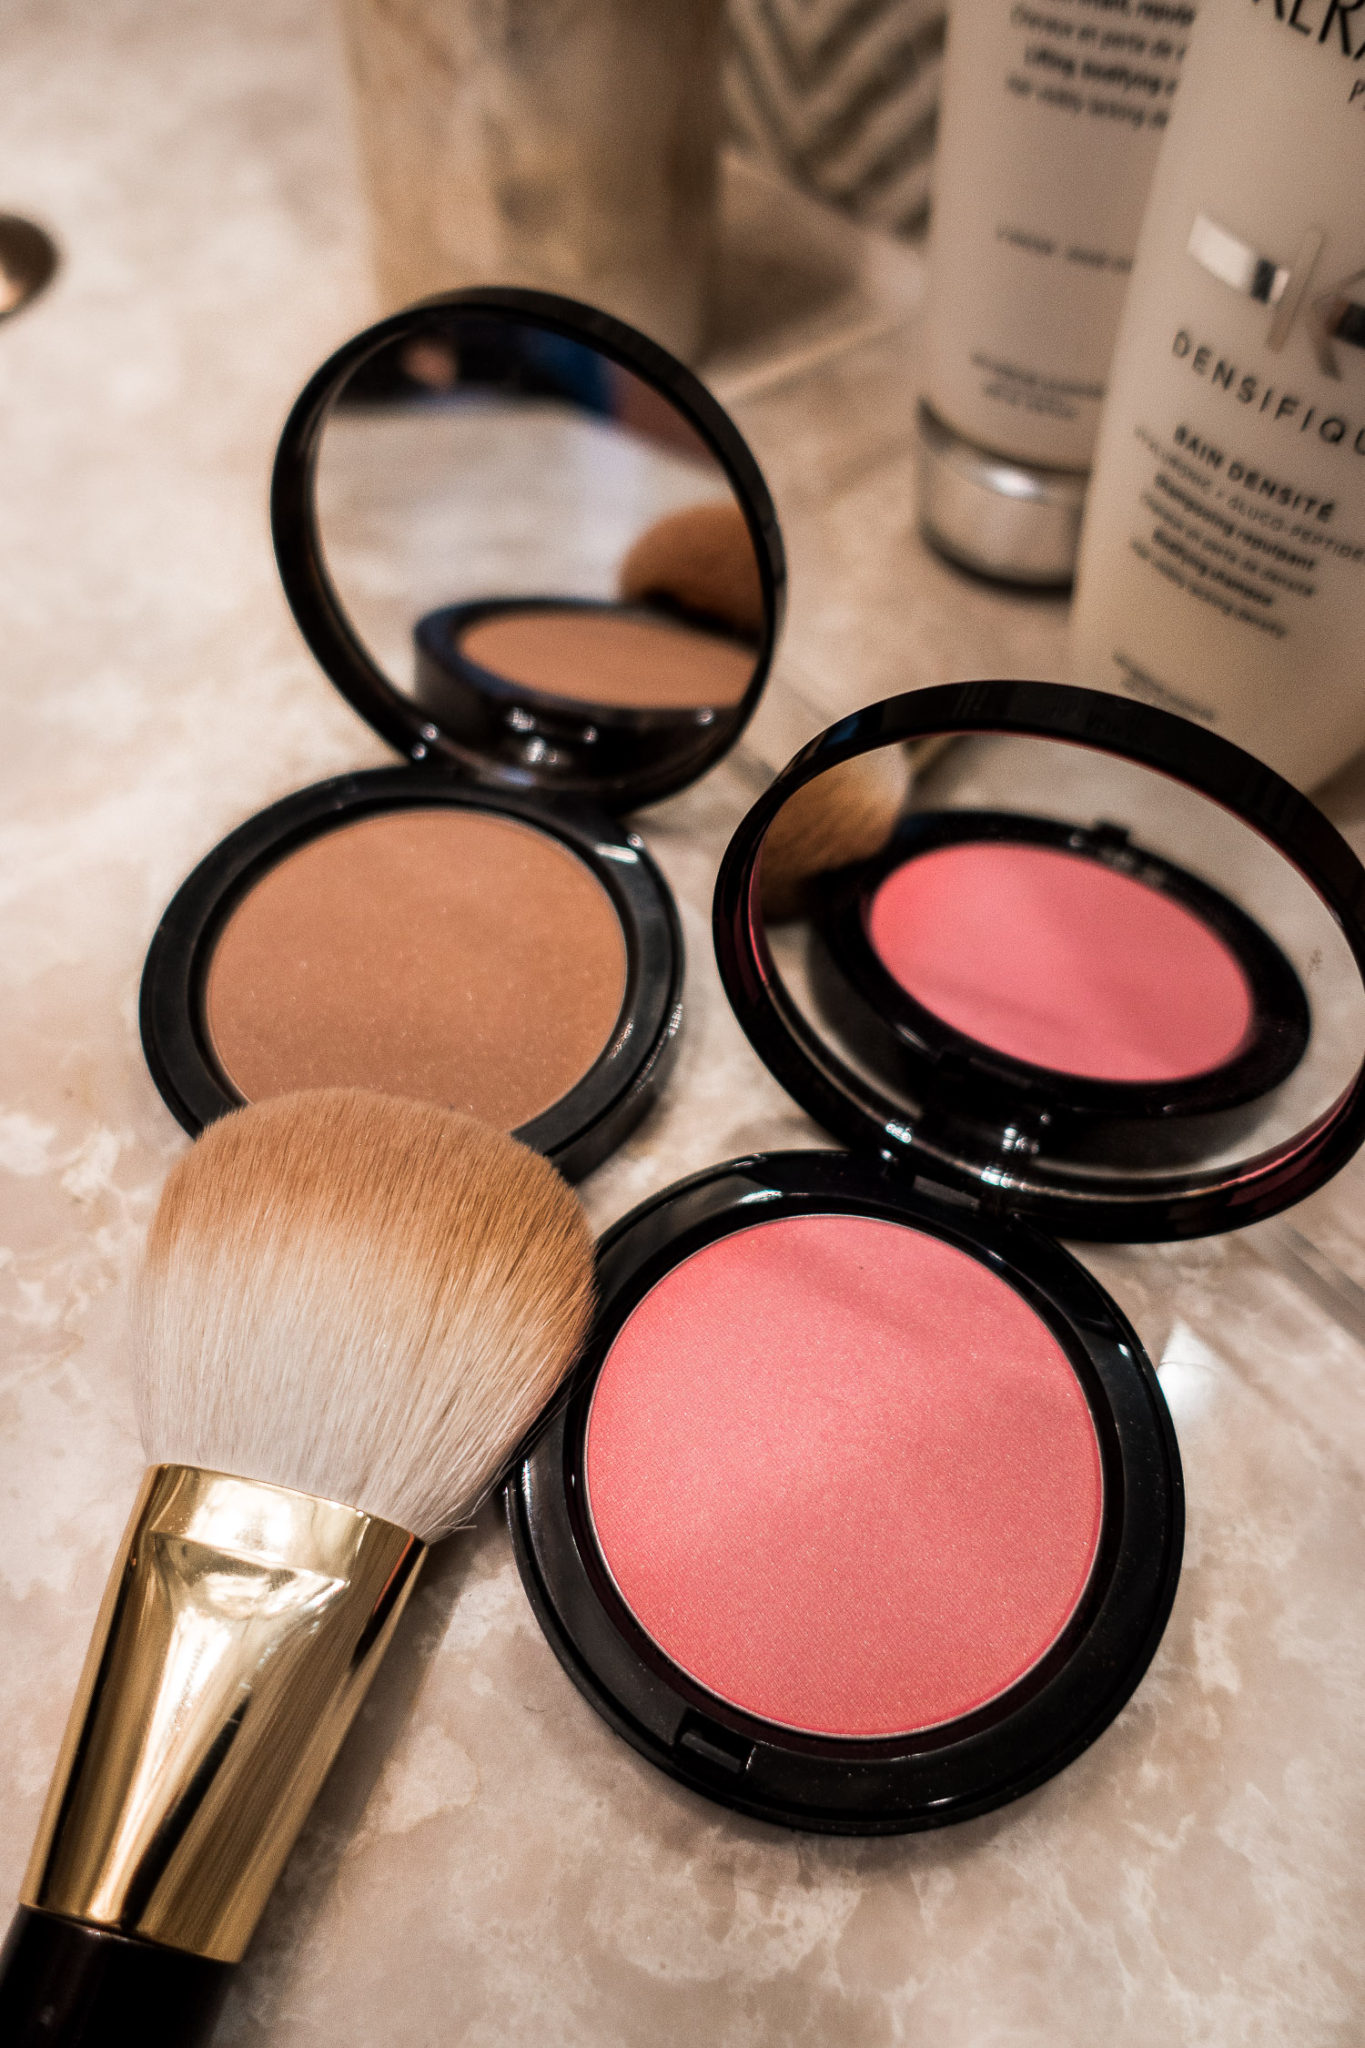 July beauty faves include the Bobbi Brown bronzers in Bali Brown and Maui